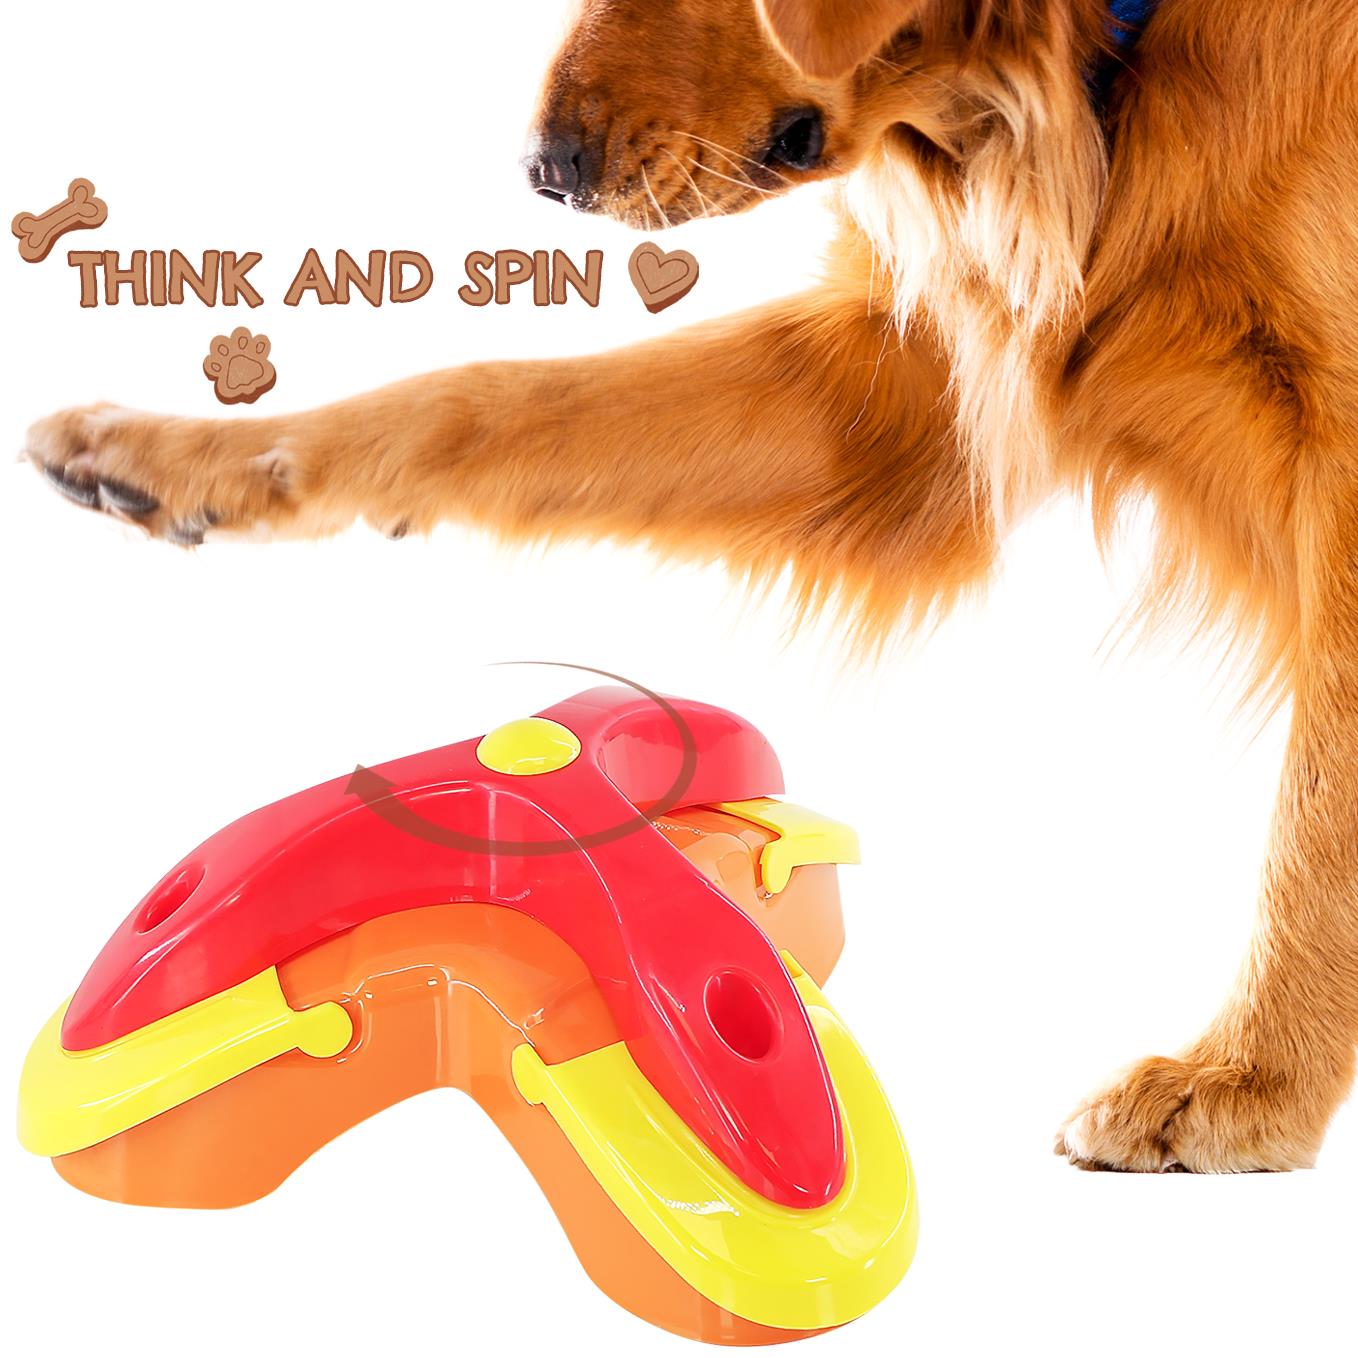 Dog Toy for Energetic Pups by The Magic Toy Shop - UKBuyZone